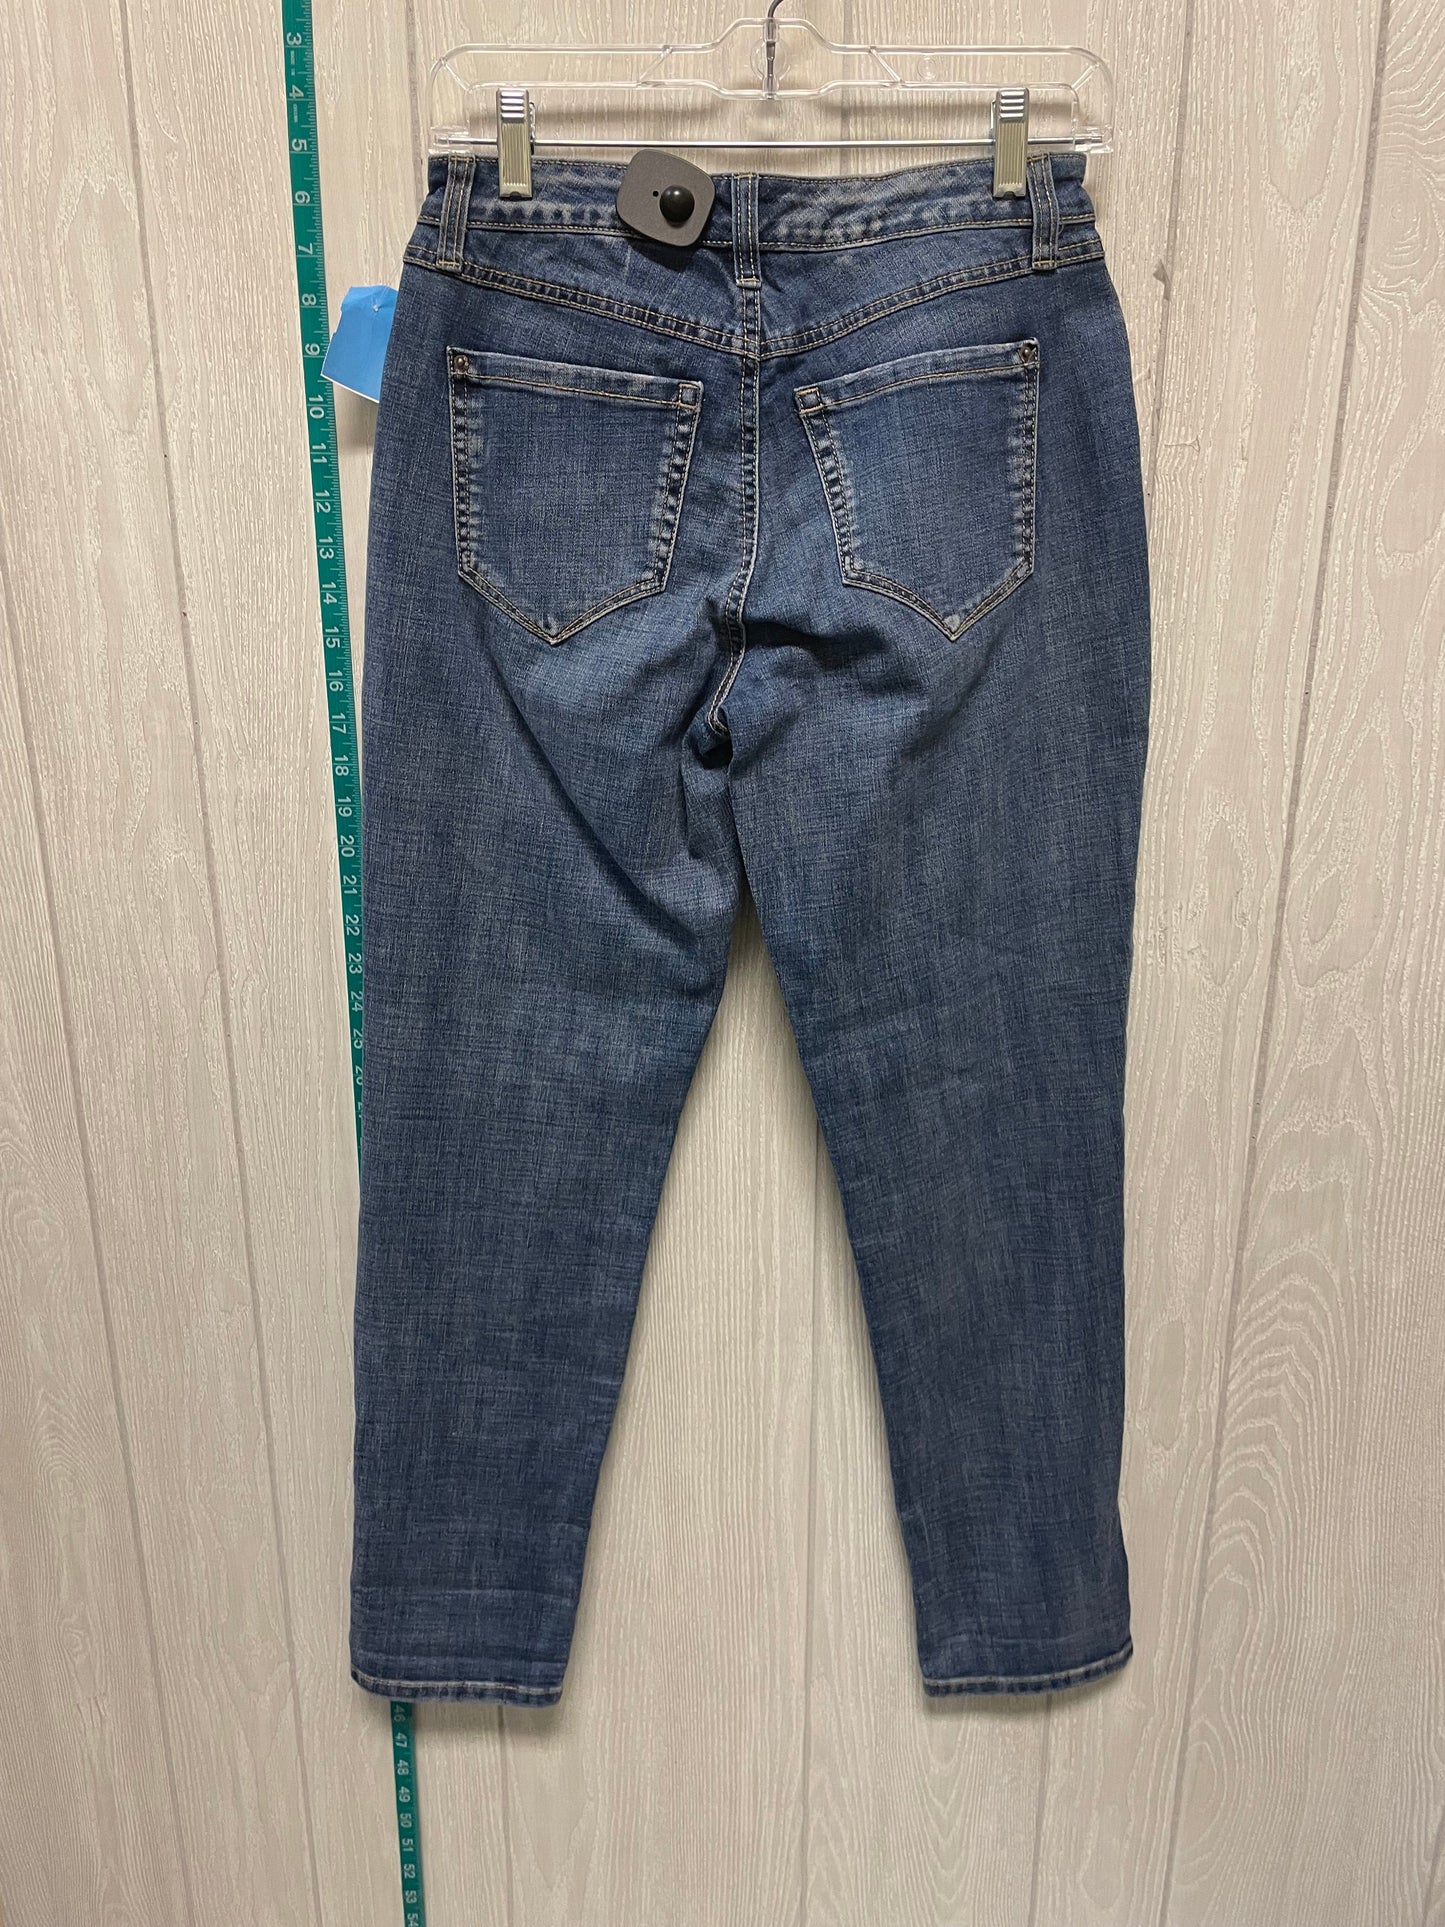 Jeans Relaxed/boyfriend By Inc O  Size: 2